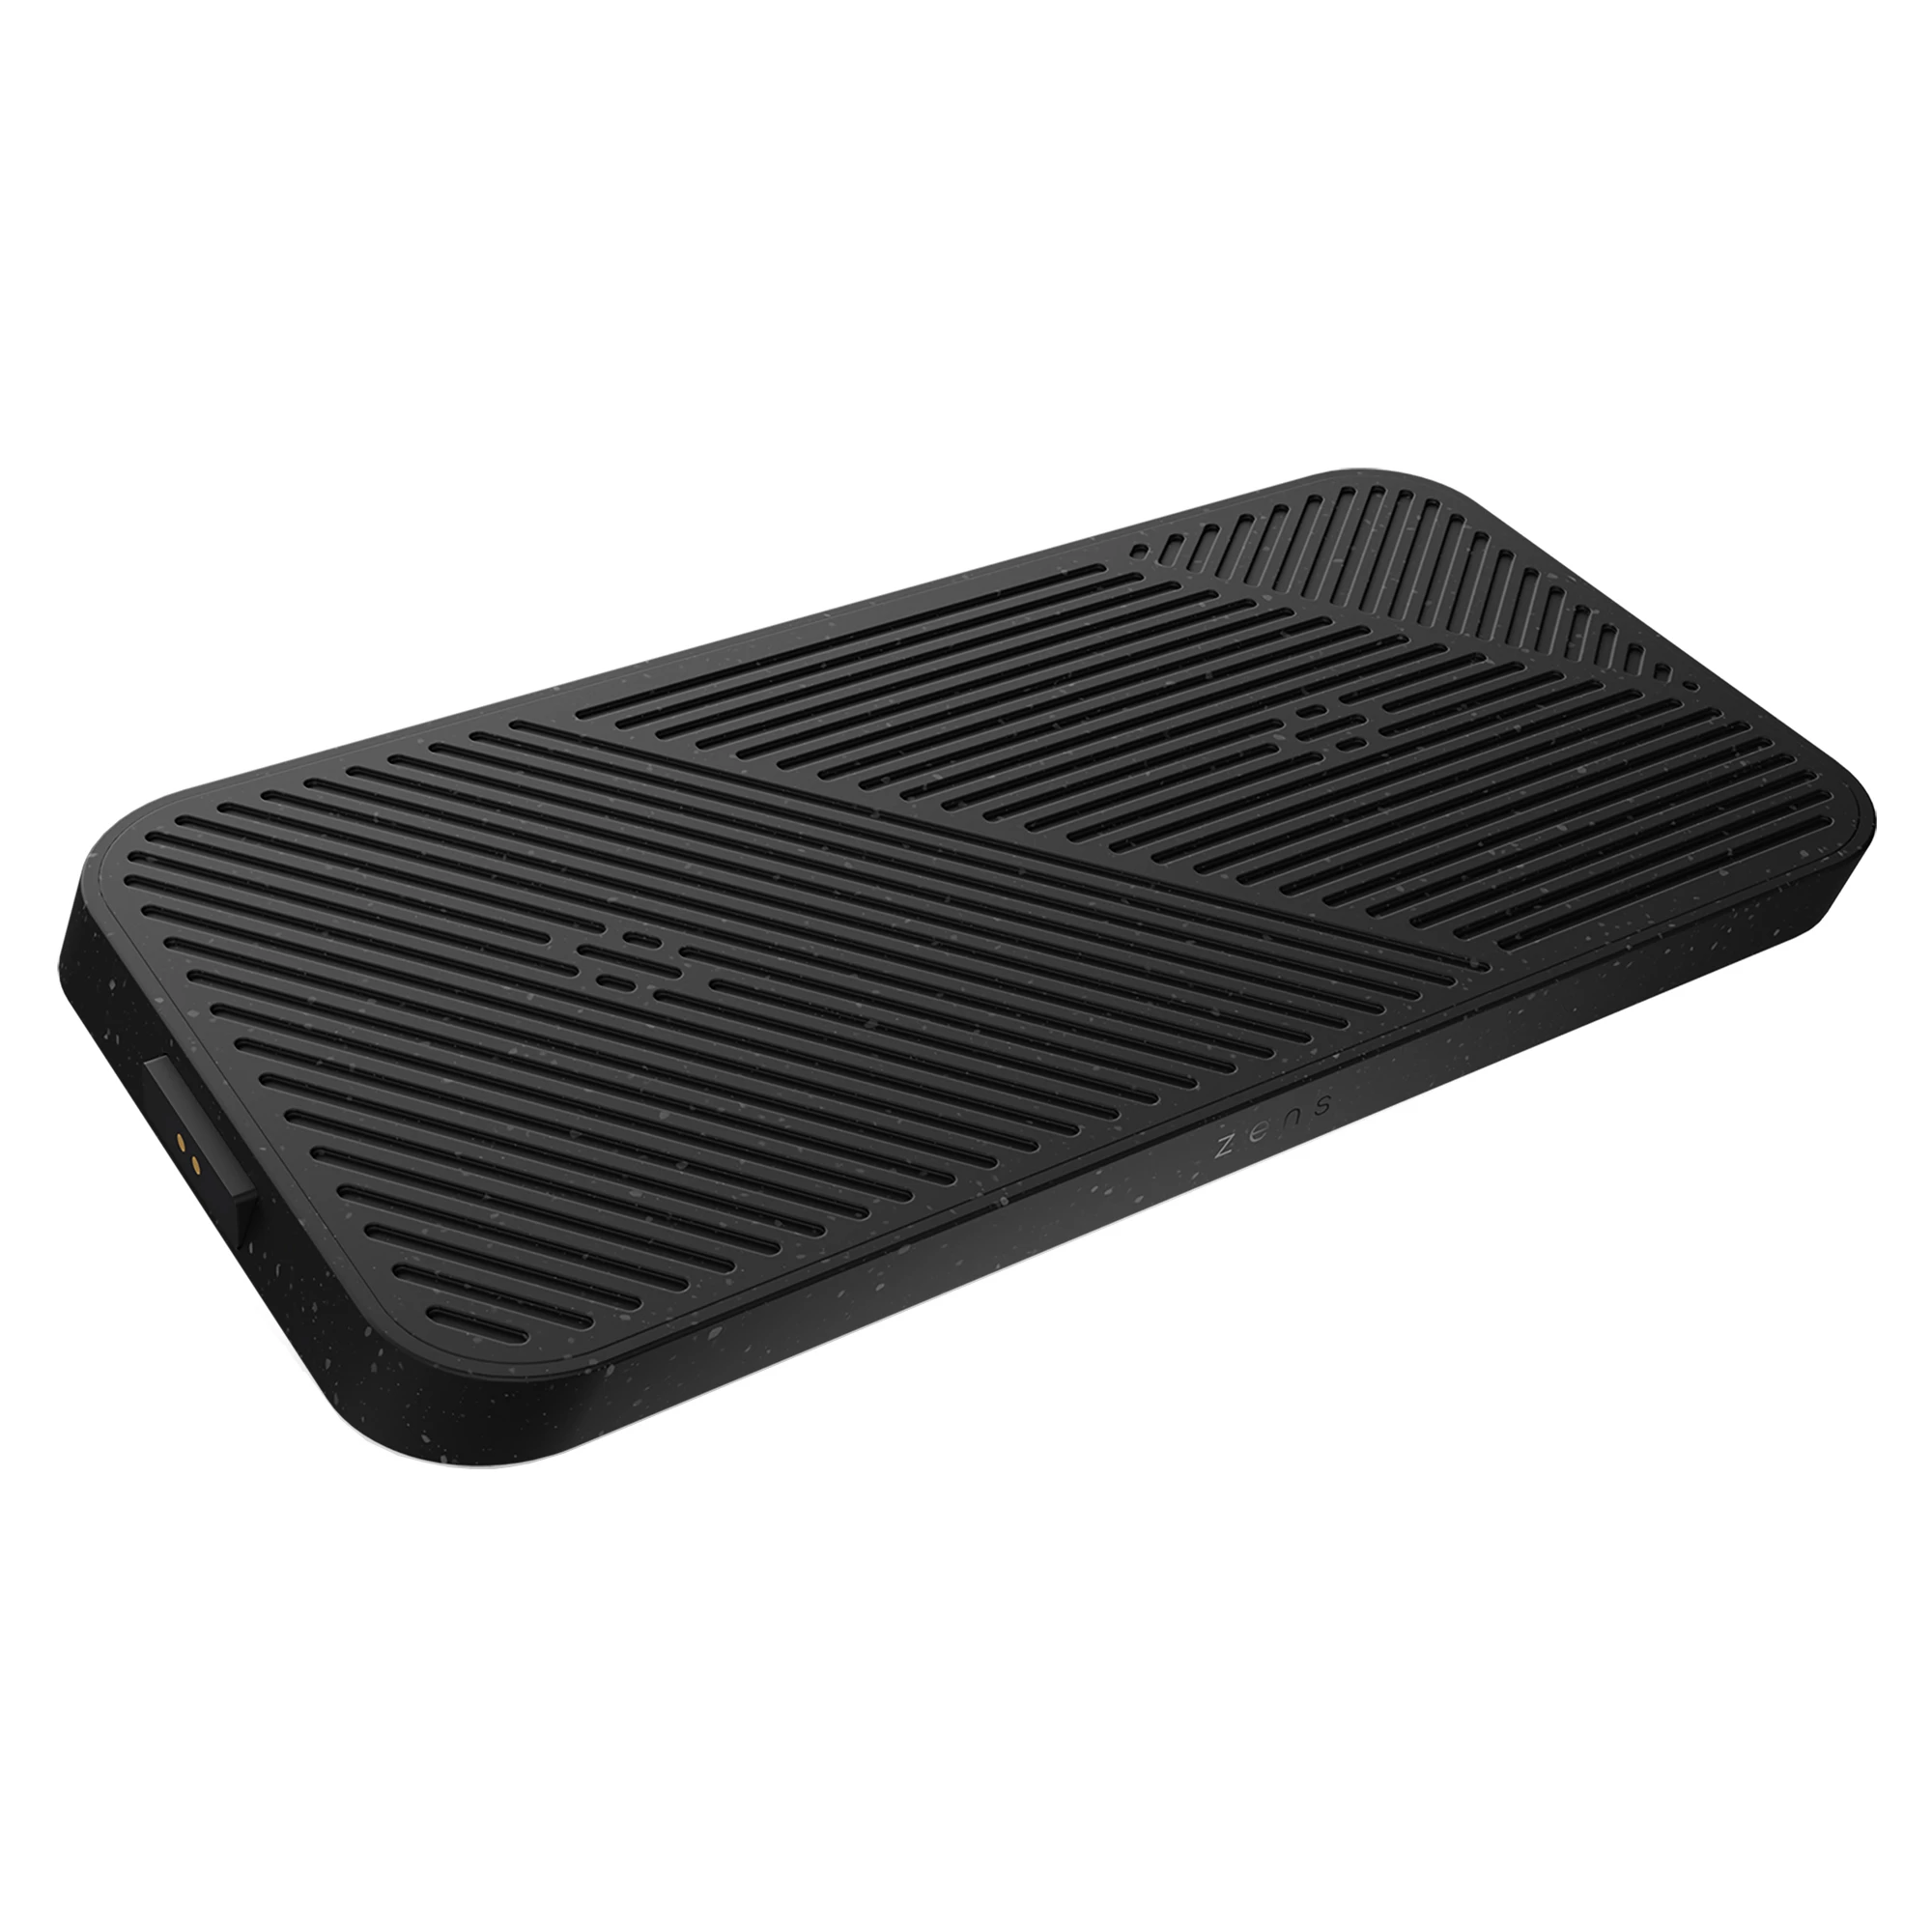 Zens Modular Dual Wireless Charger Black with Wall Charger (ZEMDC1P/00)